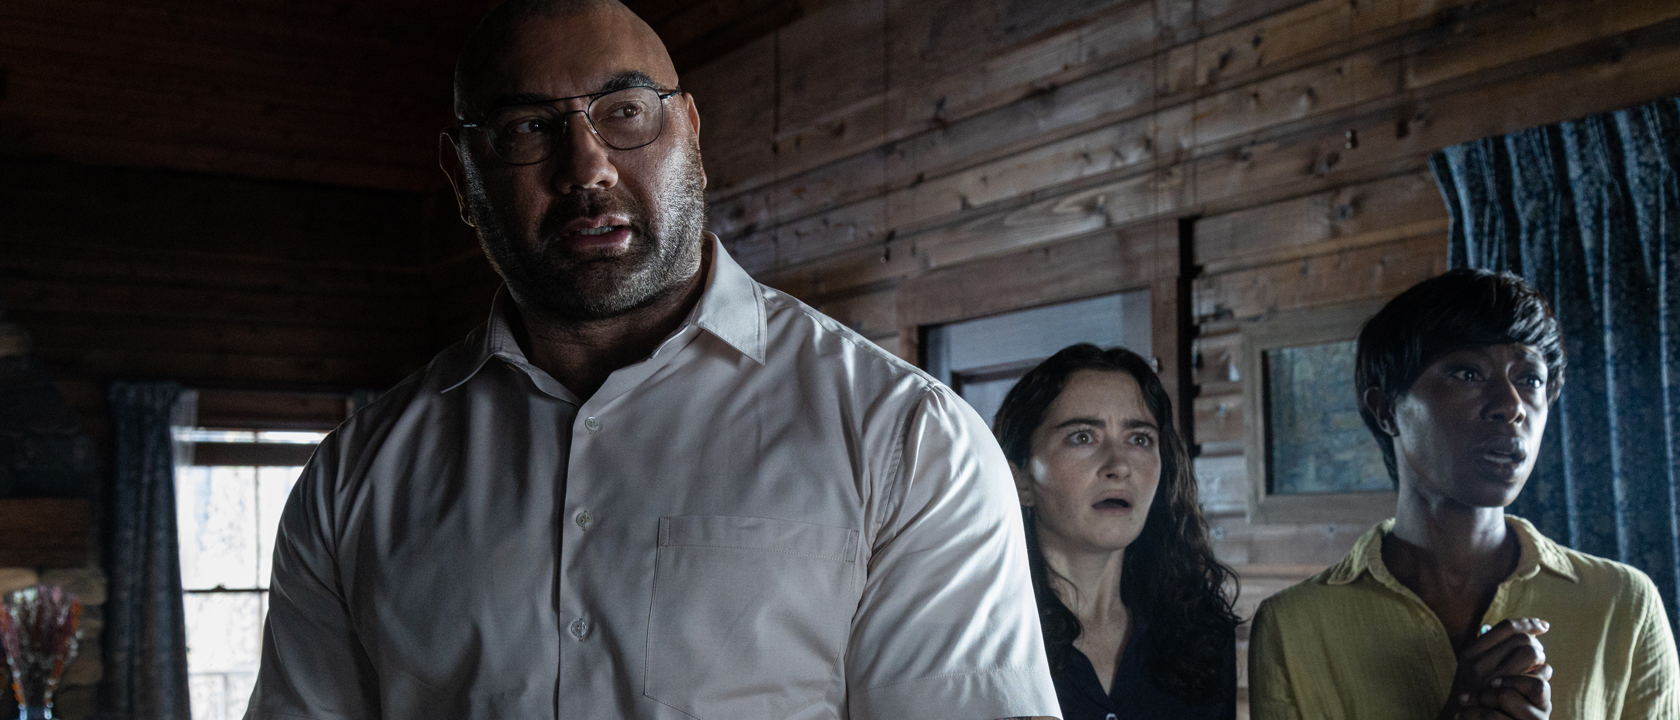 Knock At The Cabin Review: M. Night Shyamalan’s Latest Is Tense Until It Just Becomes Disappointing